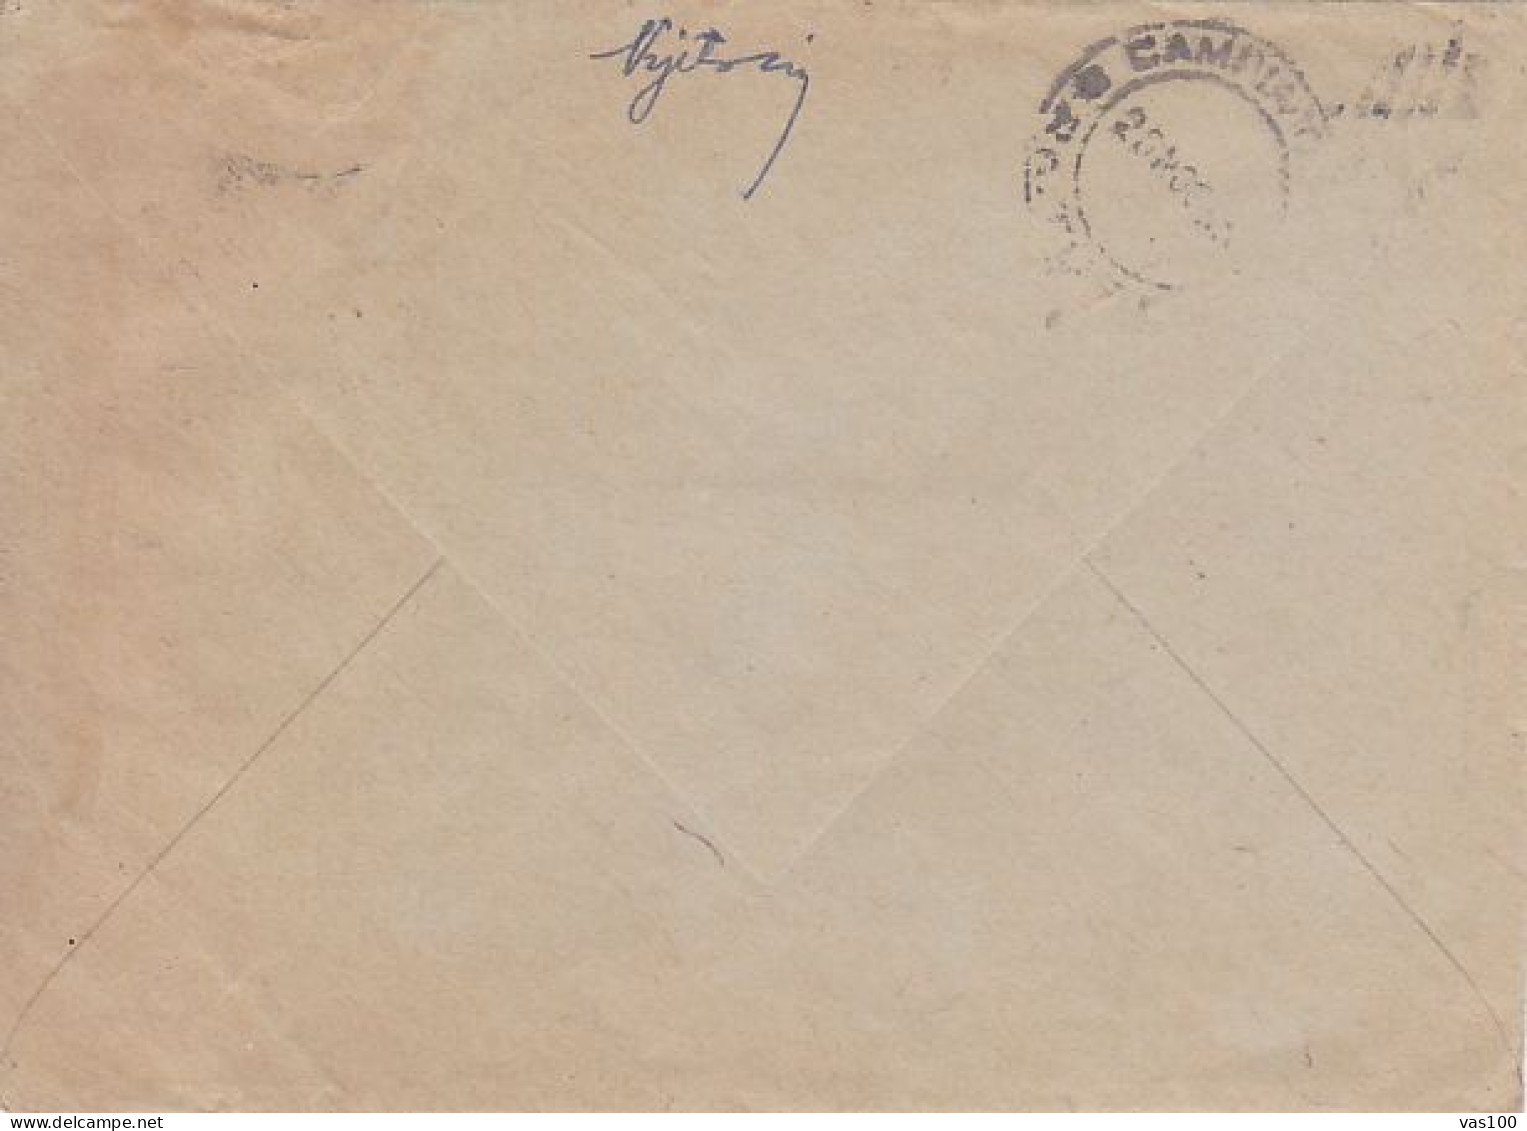 BUCHAREST YOUTH PIONEERS PALACE, STAMP ON COVER, 1951, ROMANIA - Brieven En Documenten